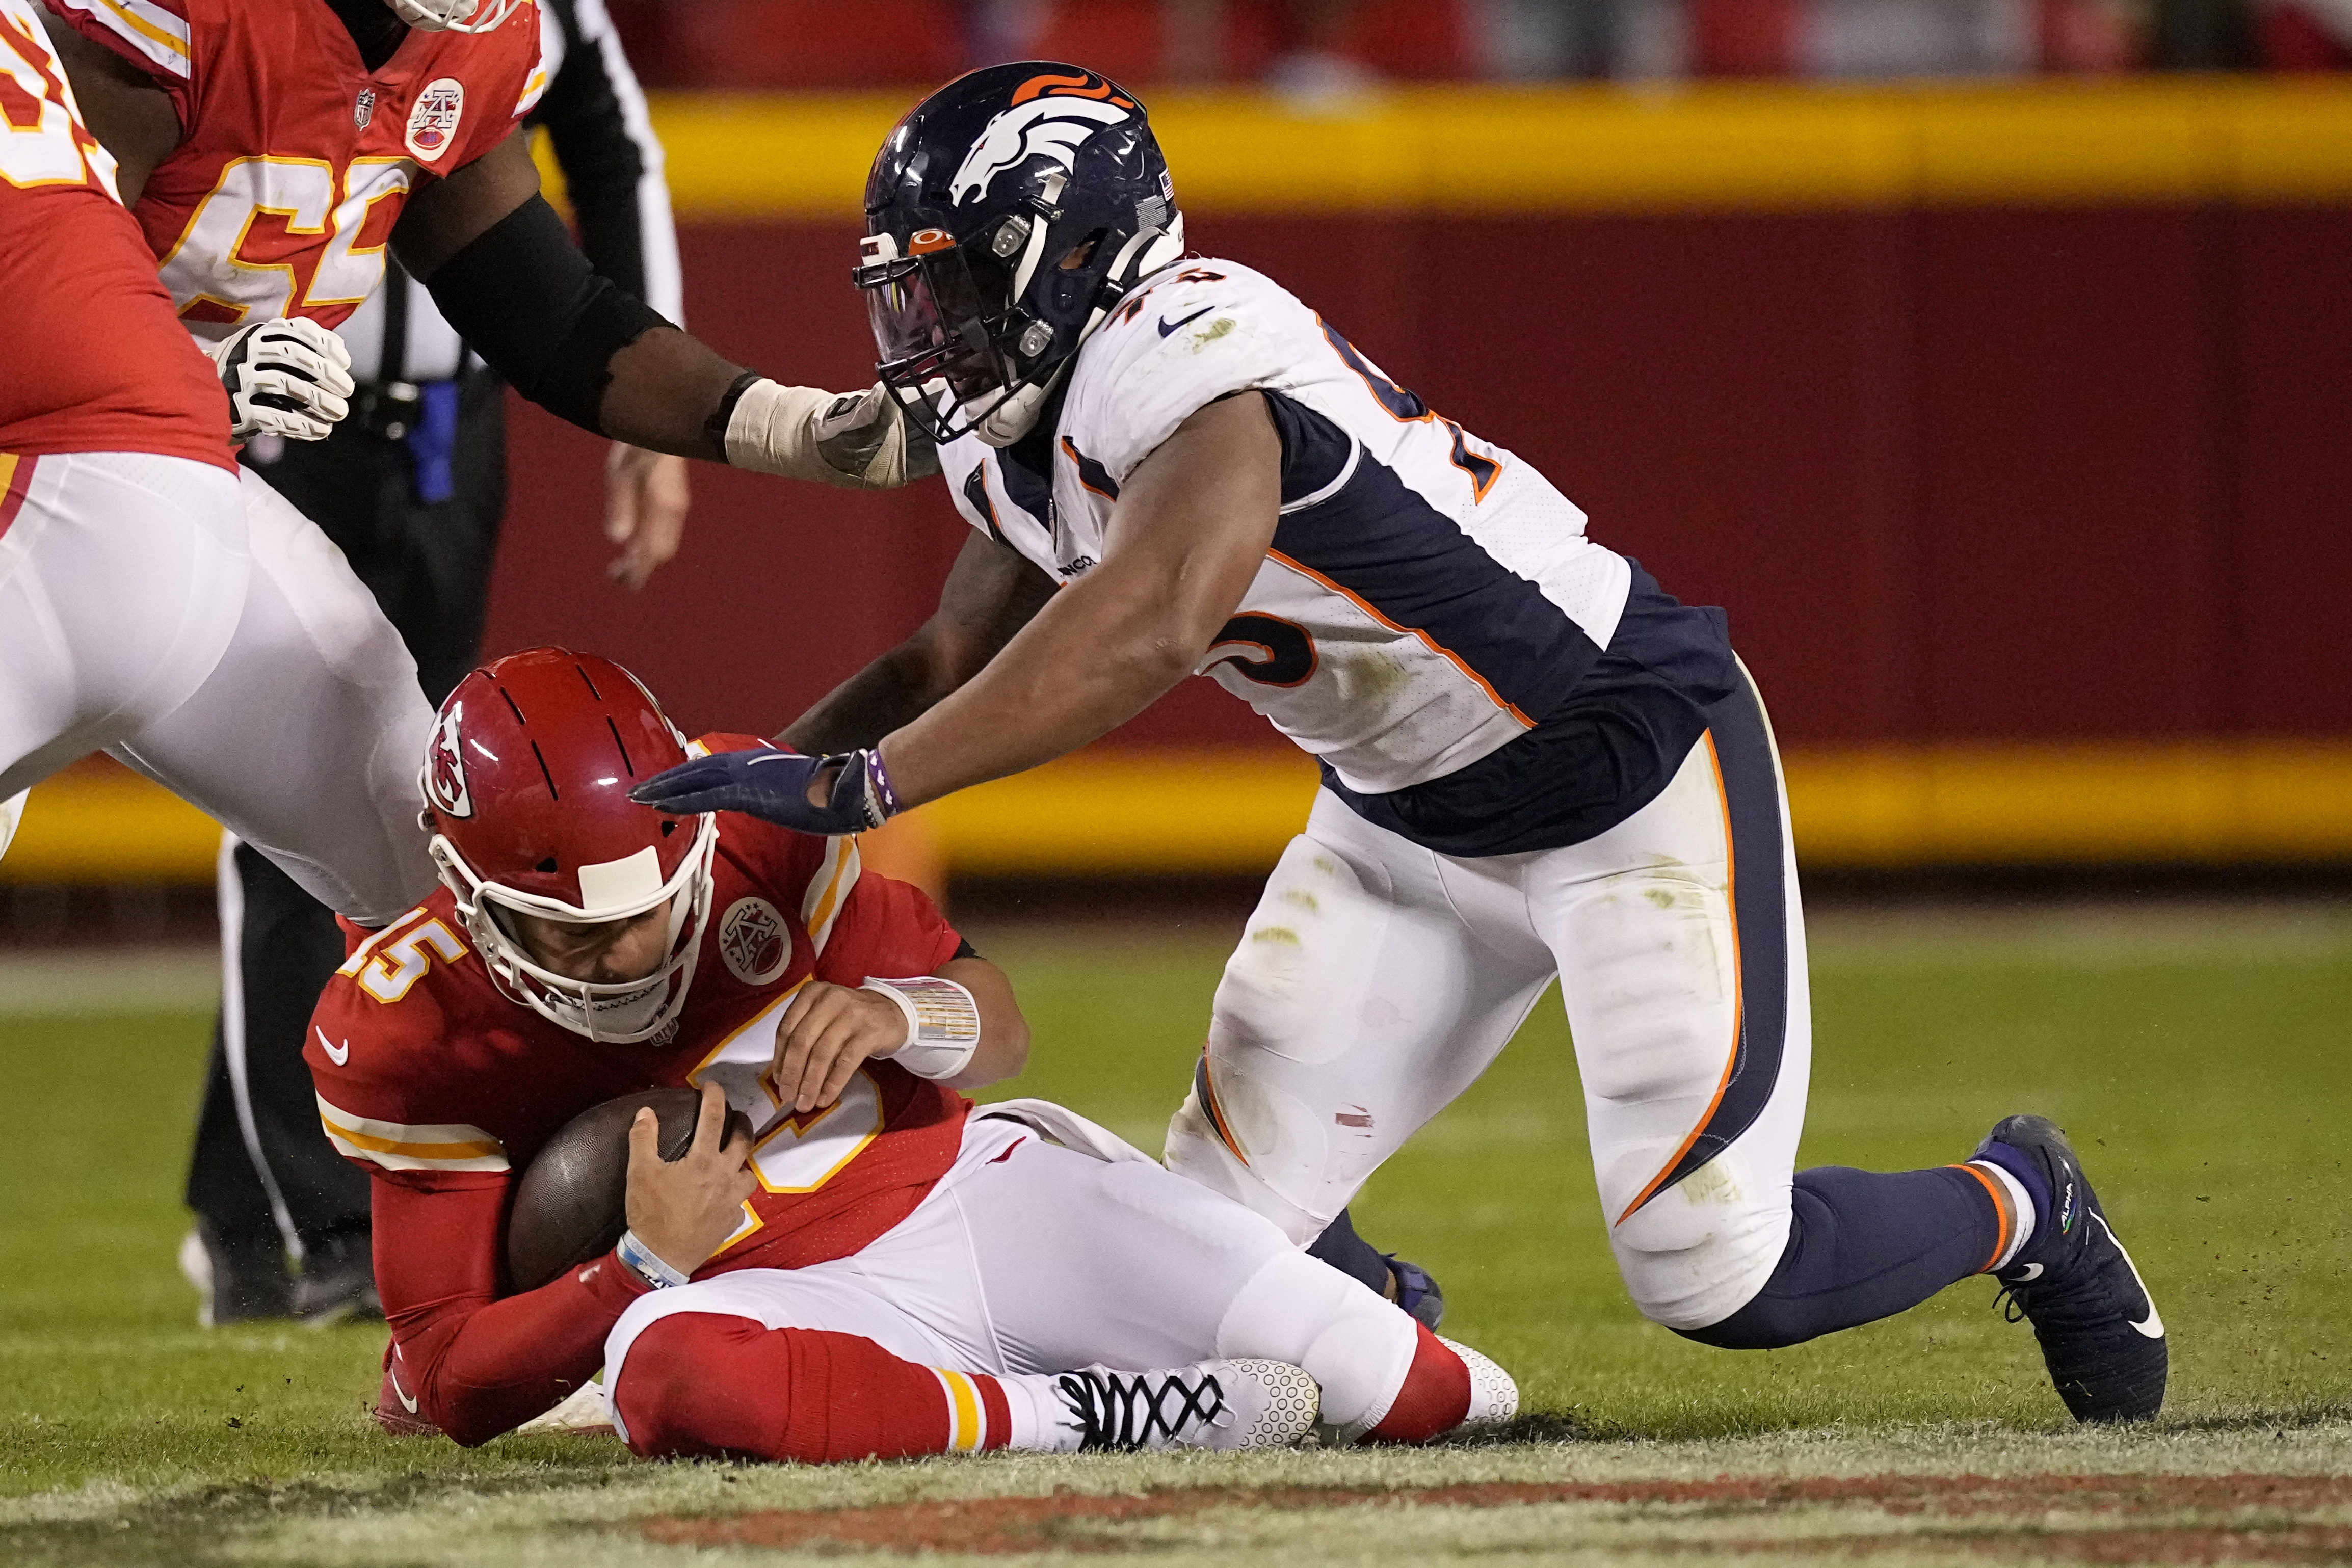 There's Still Hope for the Chiefs Offense - Defiant Takes Football